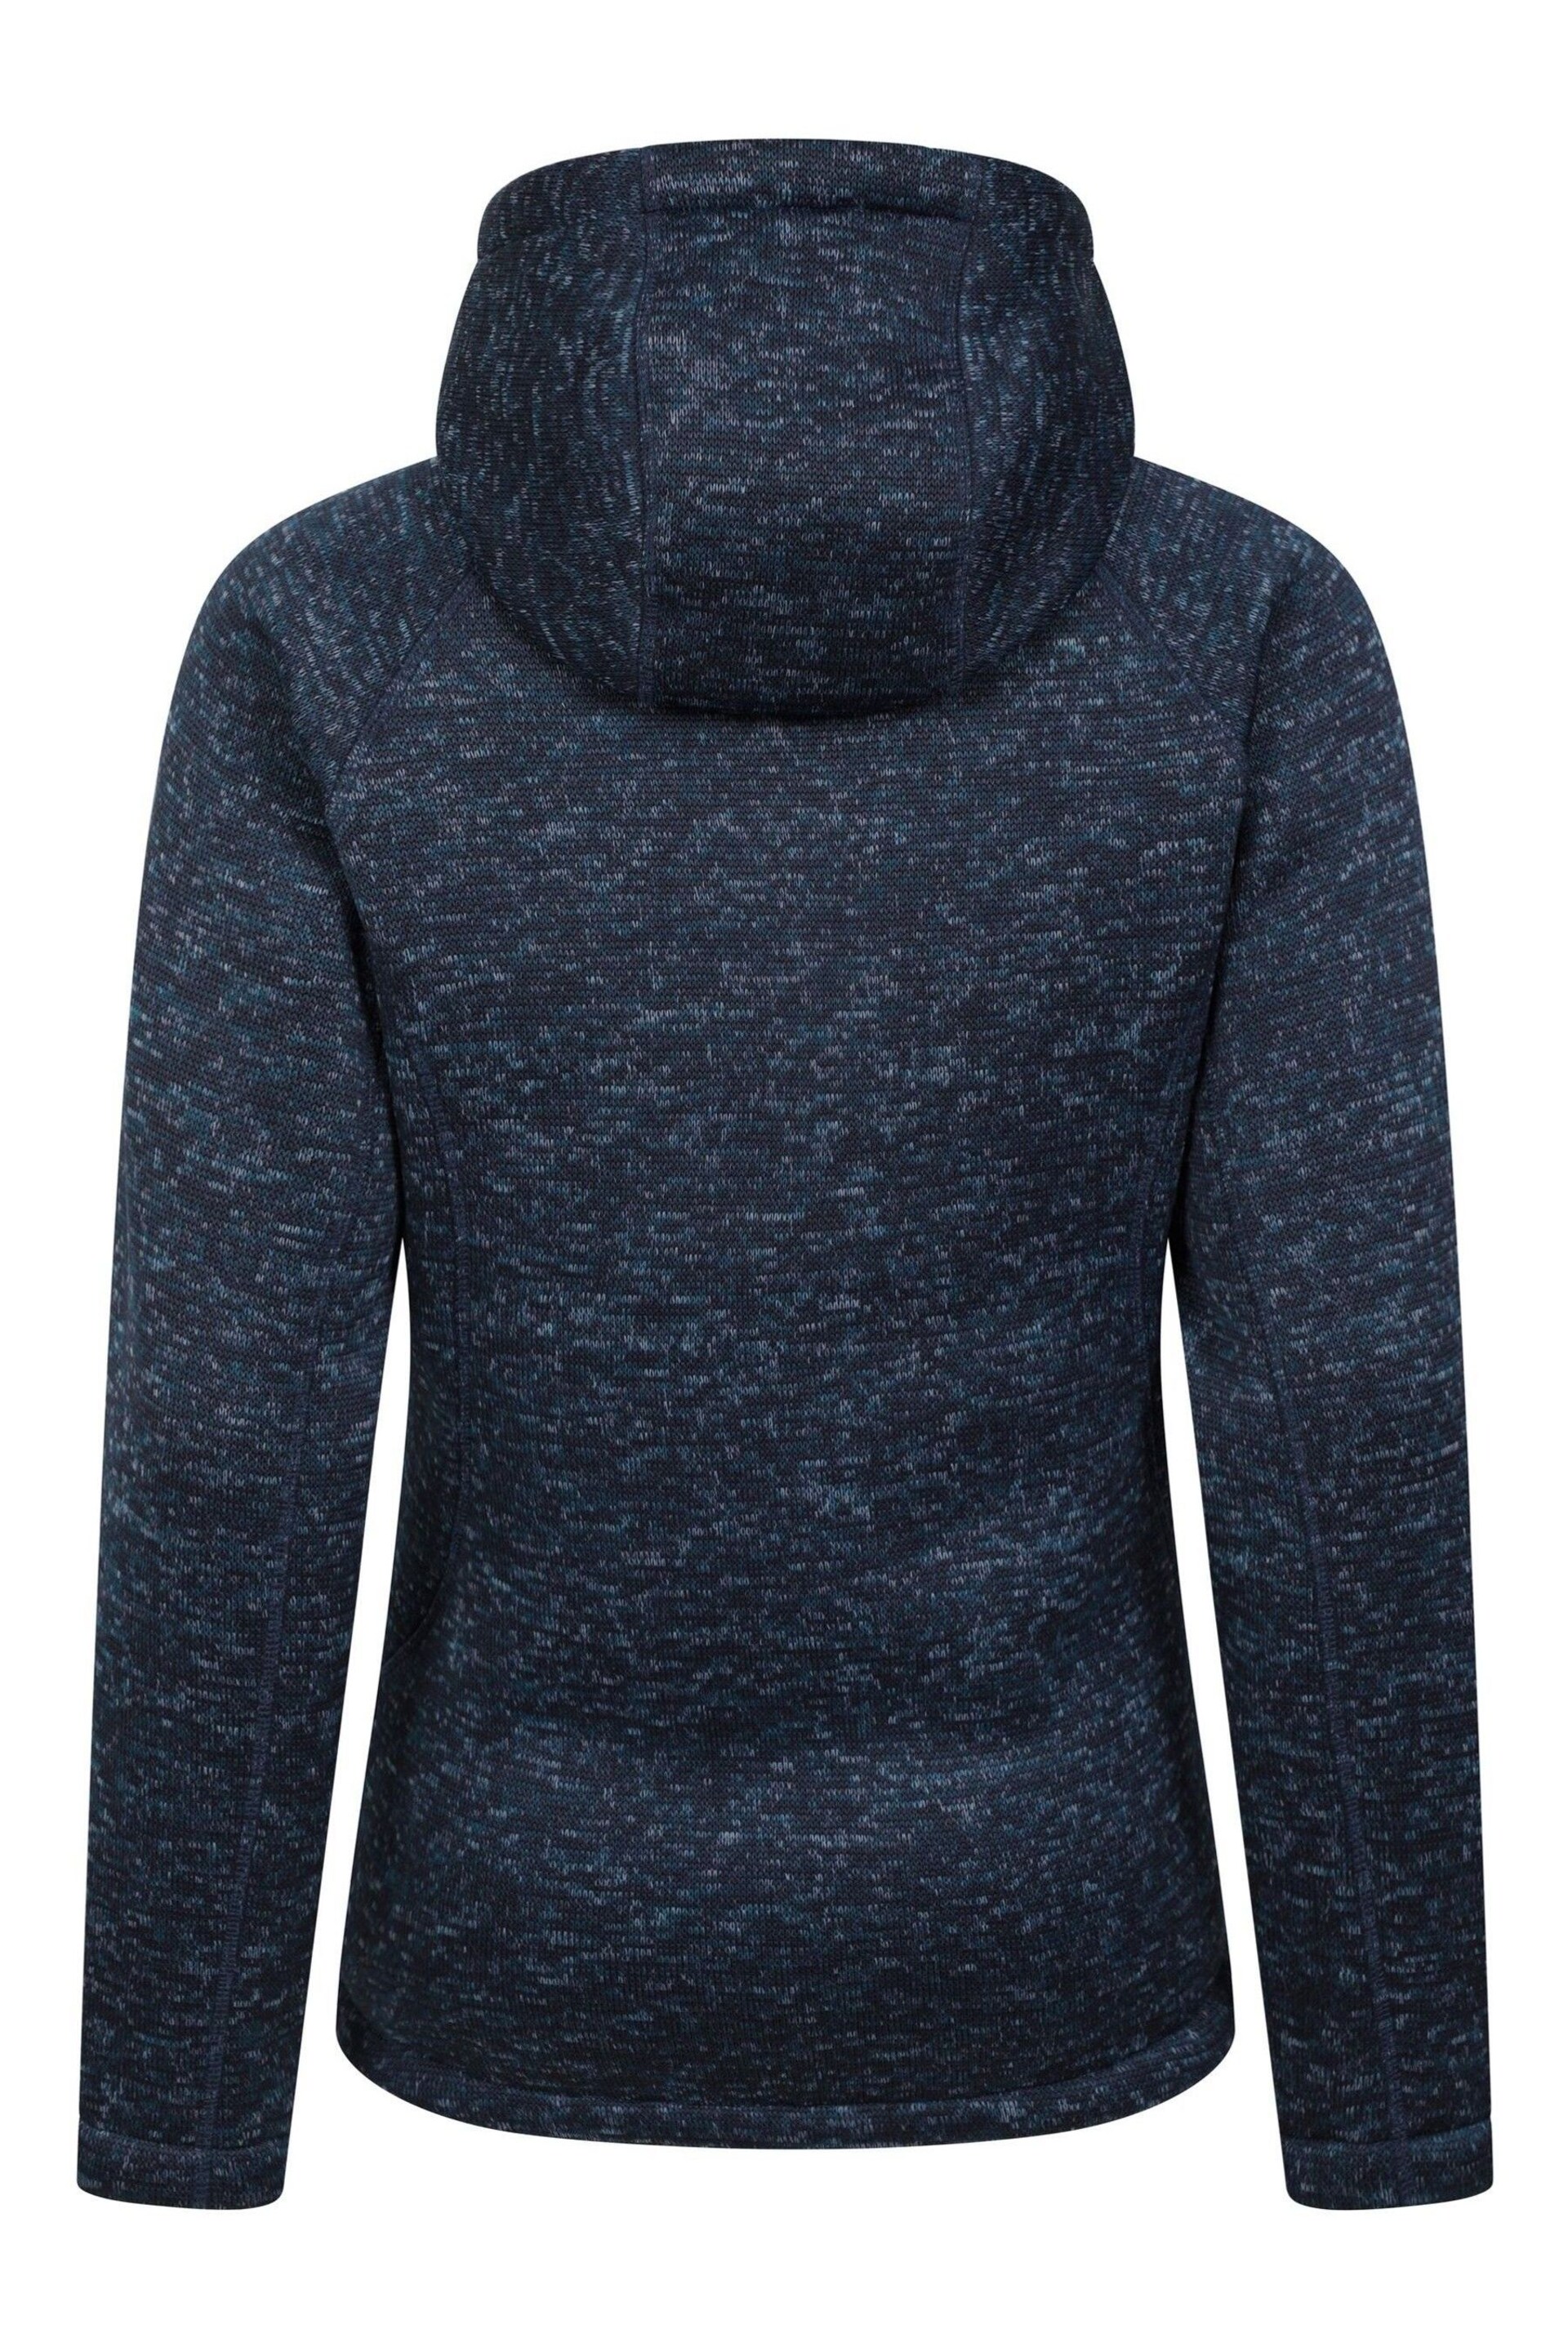 Mountain Warehouse Navy Blue Nevis Sherpa Lined Hoodie - Image 3 of 5